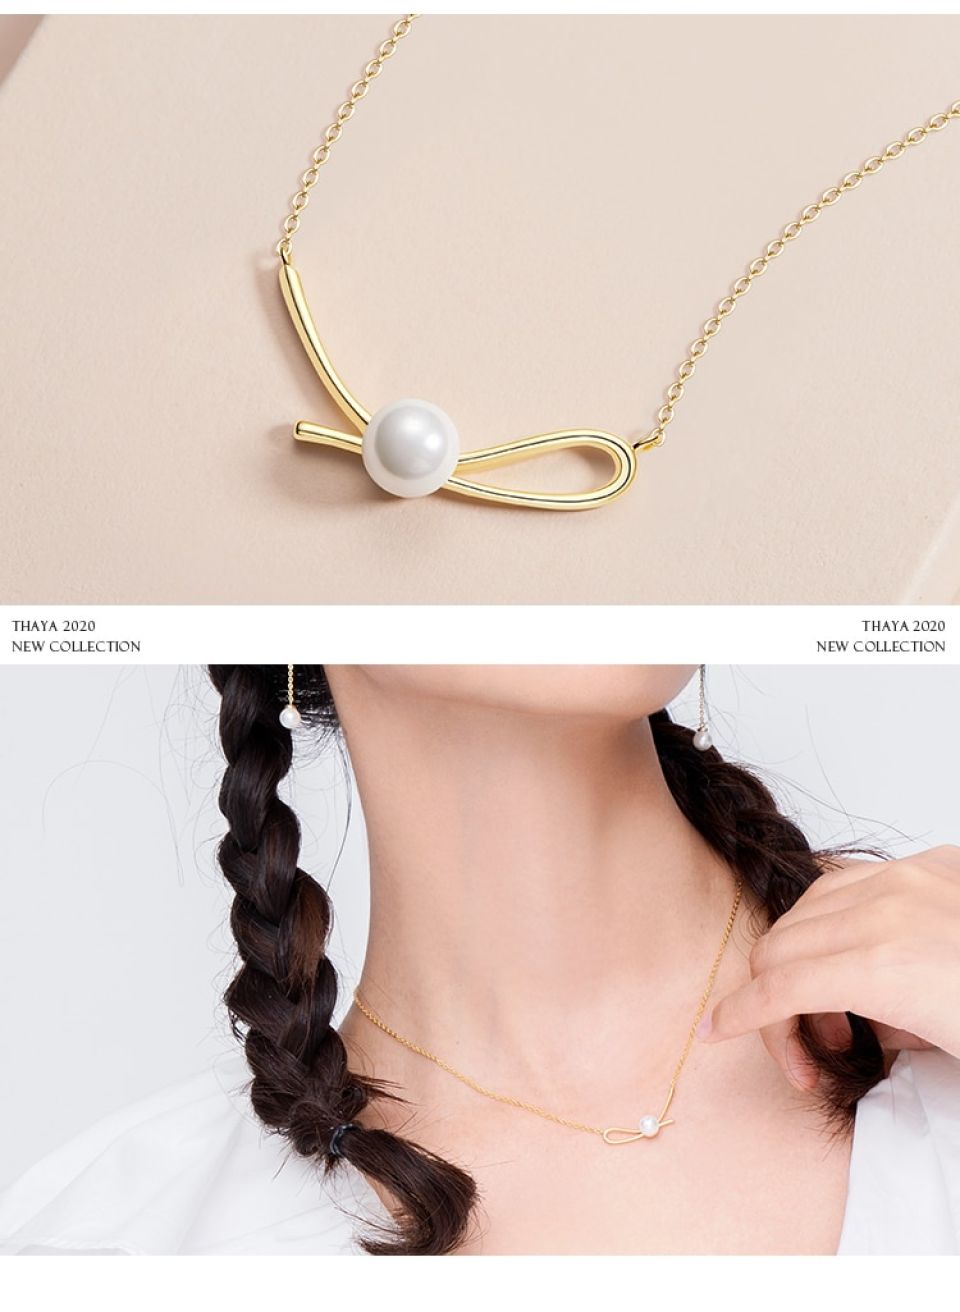 Pearl Knot Necklace admin ajax.php?action=kernel&p=image&src=%7B%22file%22%3A%22wp content%2Fuploads%2F2021%2F03%2FH9ca6ca02189b4699a02bf915d3cd09069